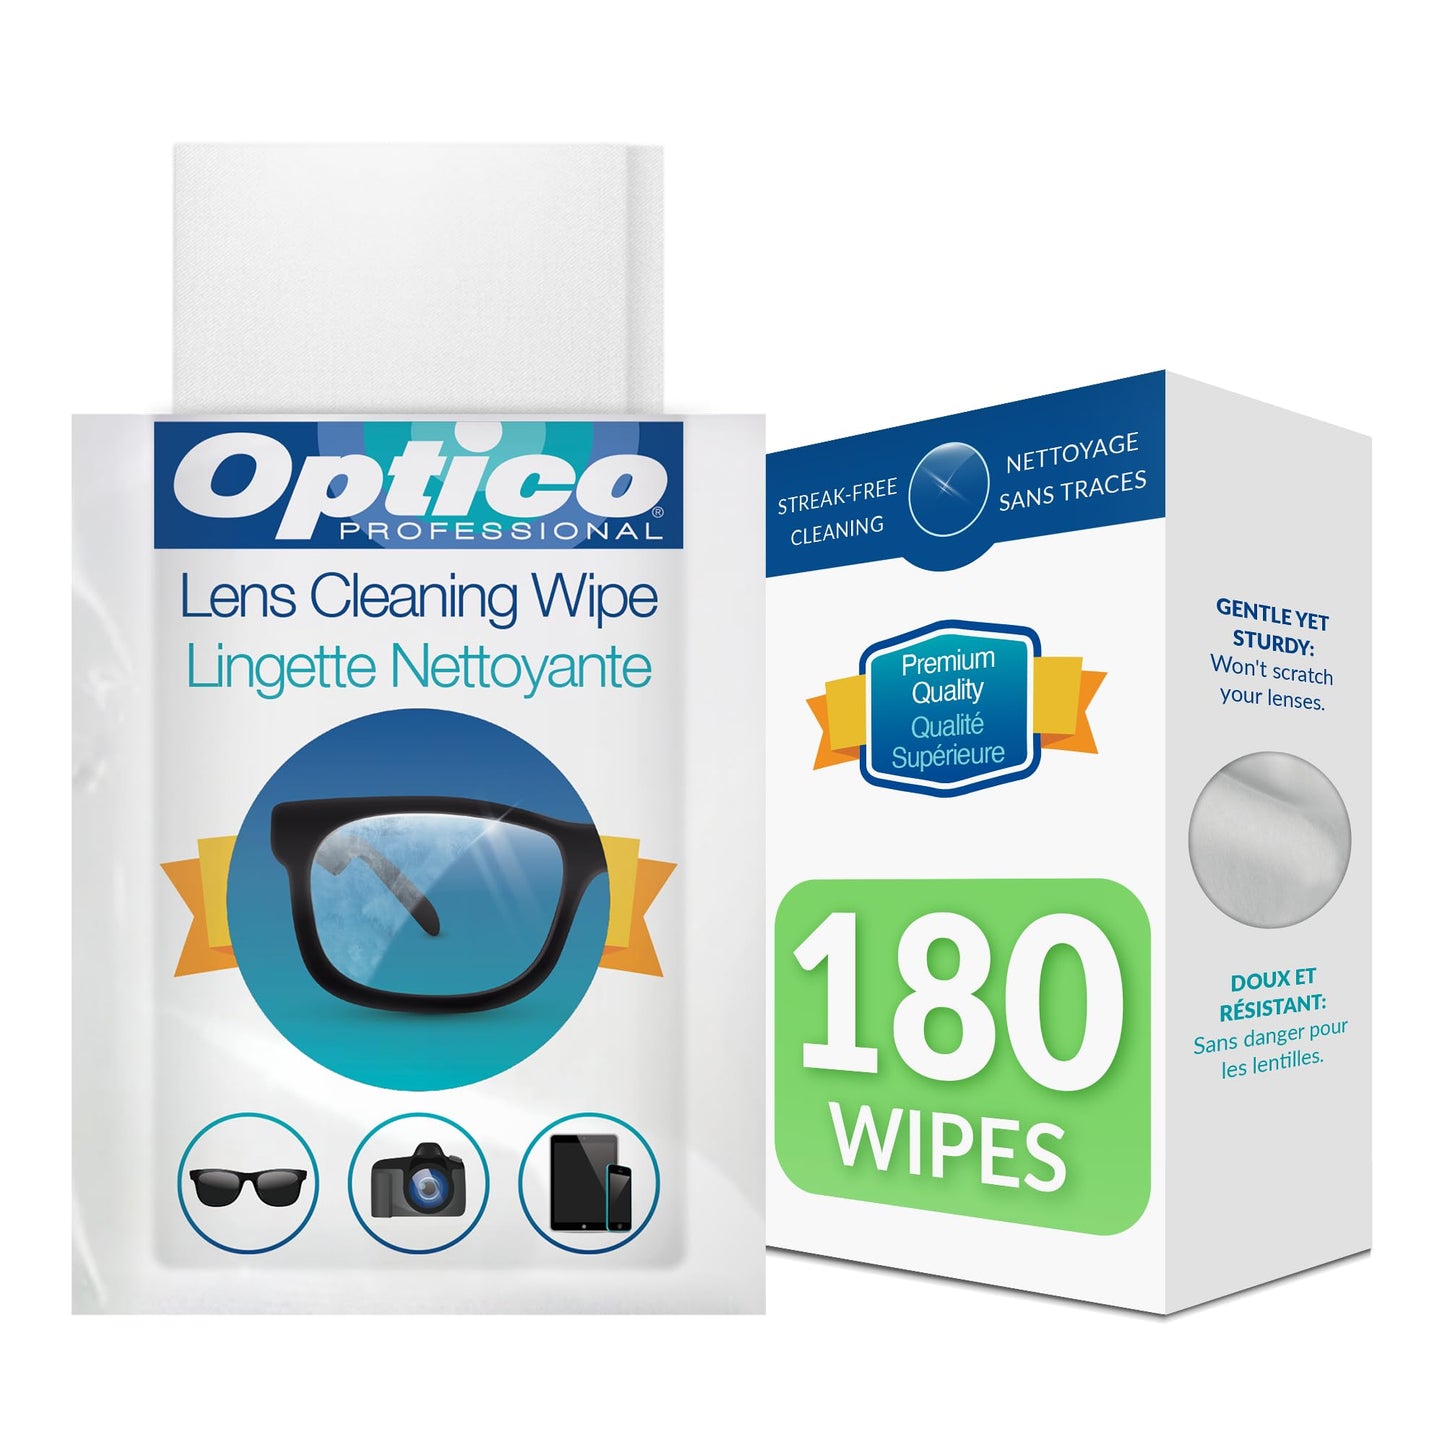 Optico Pre-Moistened Lens Cleaning Wipes - [5 x 3.5 Inches - 180 Wipes] Premium Quality Cleaner for Eyeglasses, Screens, and Cameras - No Spray Bottle Needed, Streak & Lint Free, Individually Wrapped